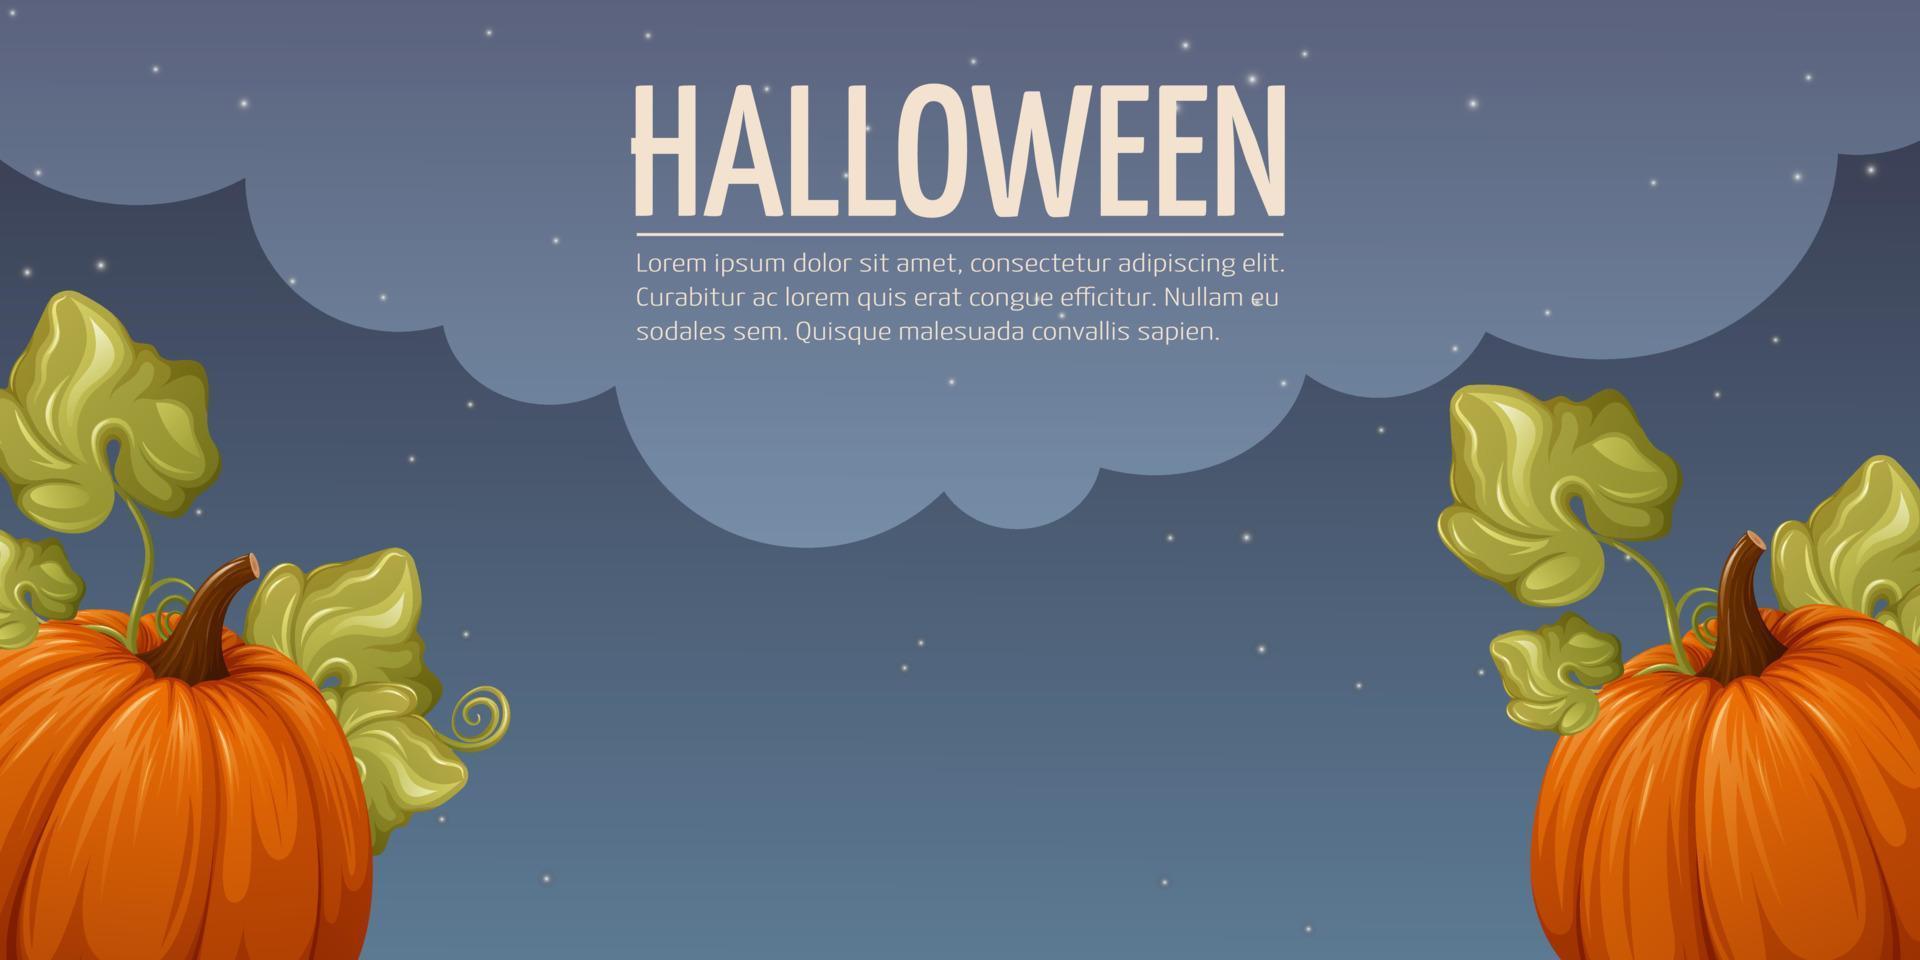 Halloween background. Pumpkins with leaves. Night star sky. Vector horizontal illustration with space for text. Template for banner, poster, flyer, website interface